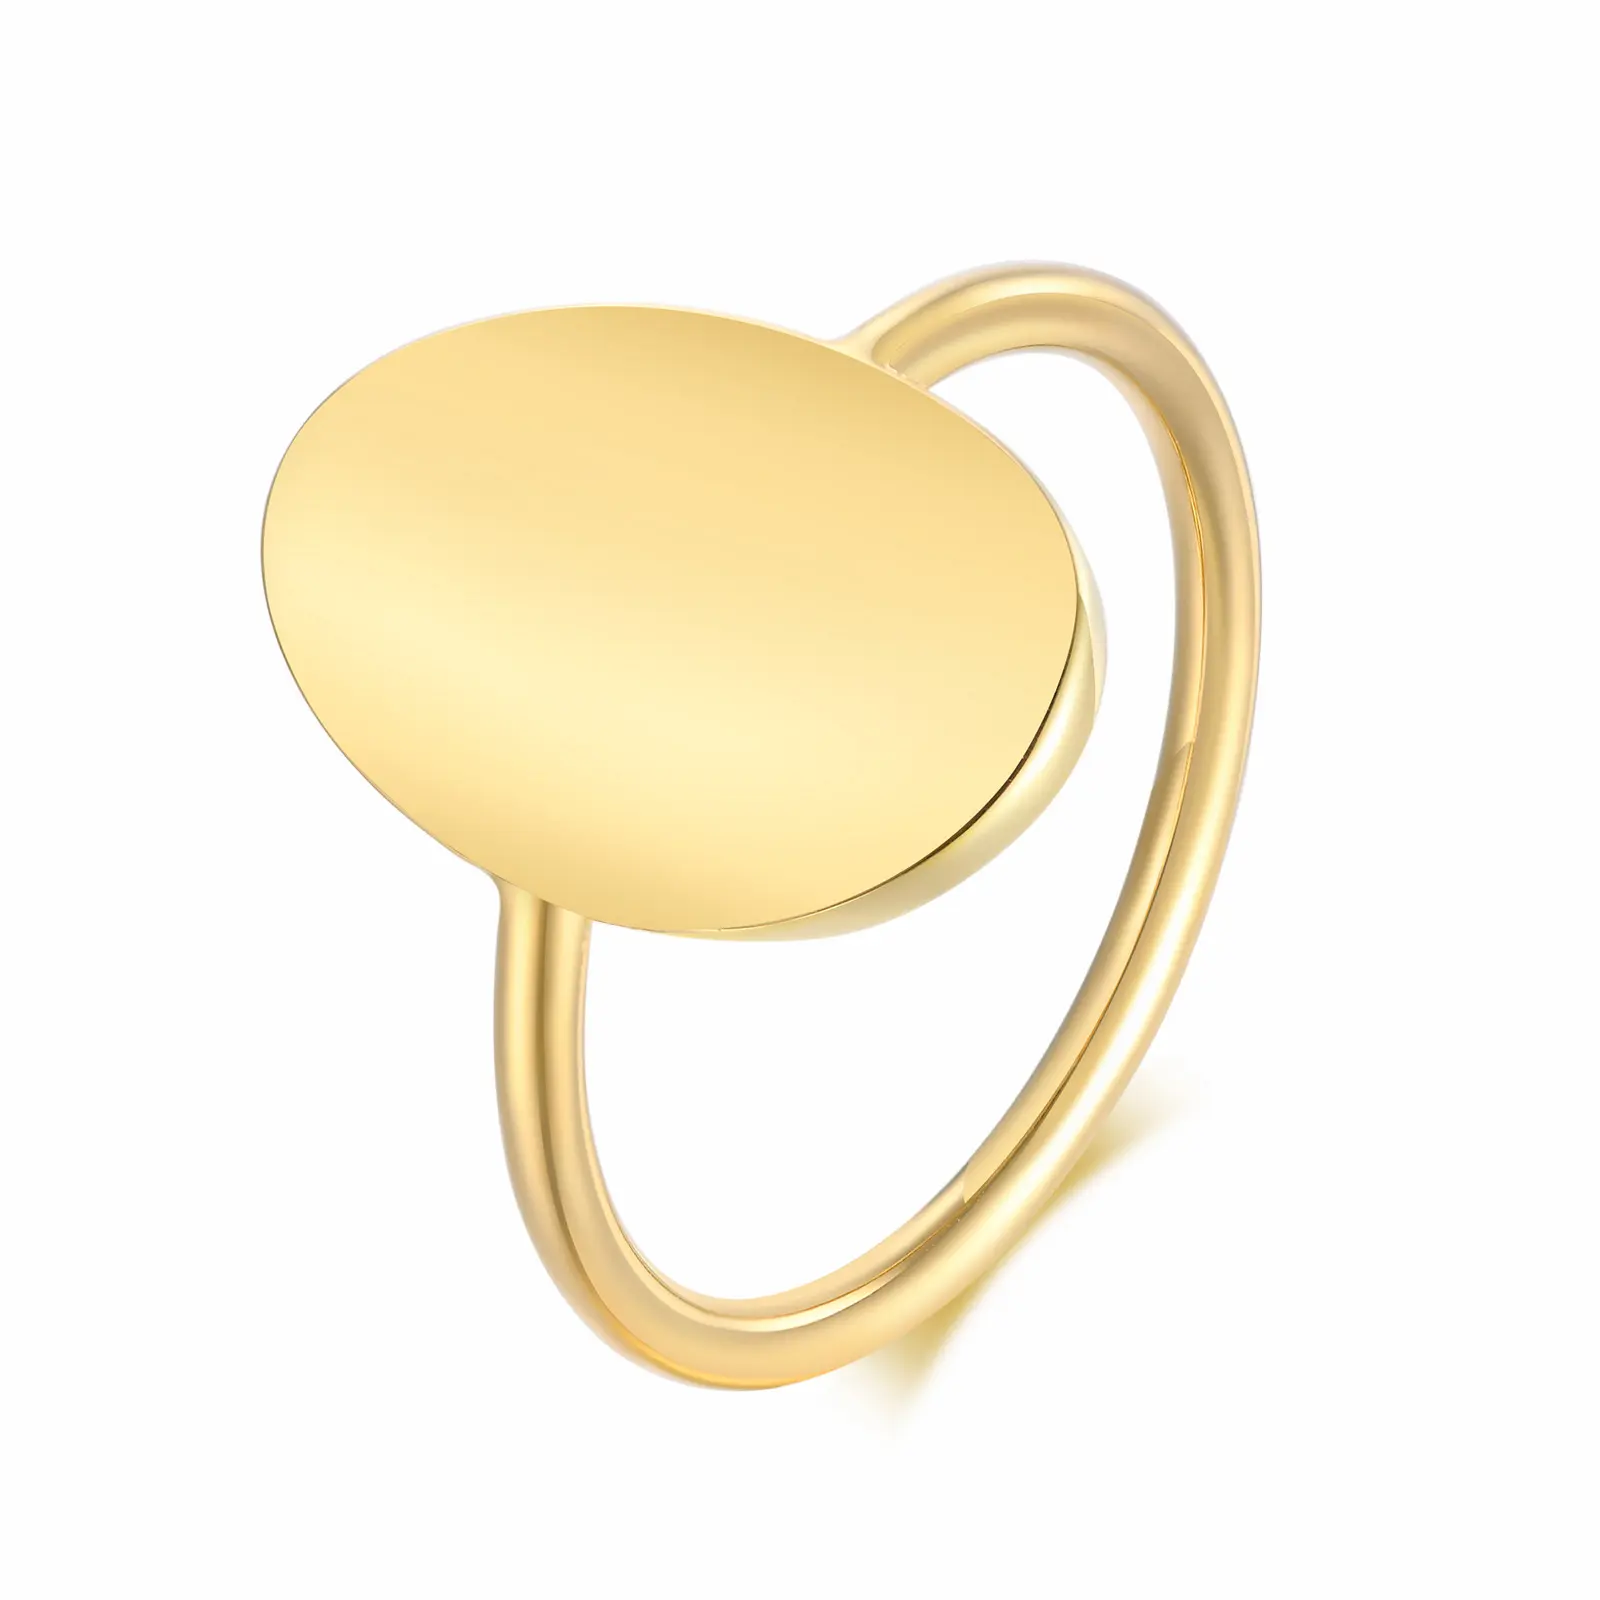 New Fashion Minimalist Ring Custom Stainless Steel Jewelry 18K Gold Plated Engravable Blank Round Signet Ring for Women